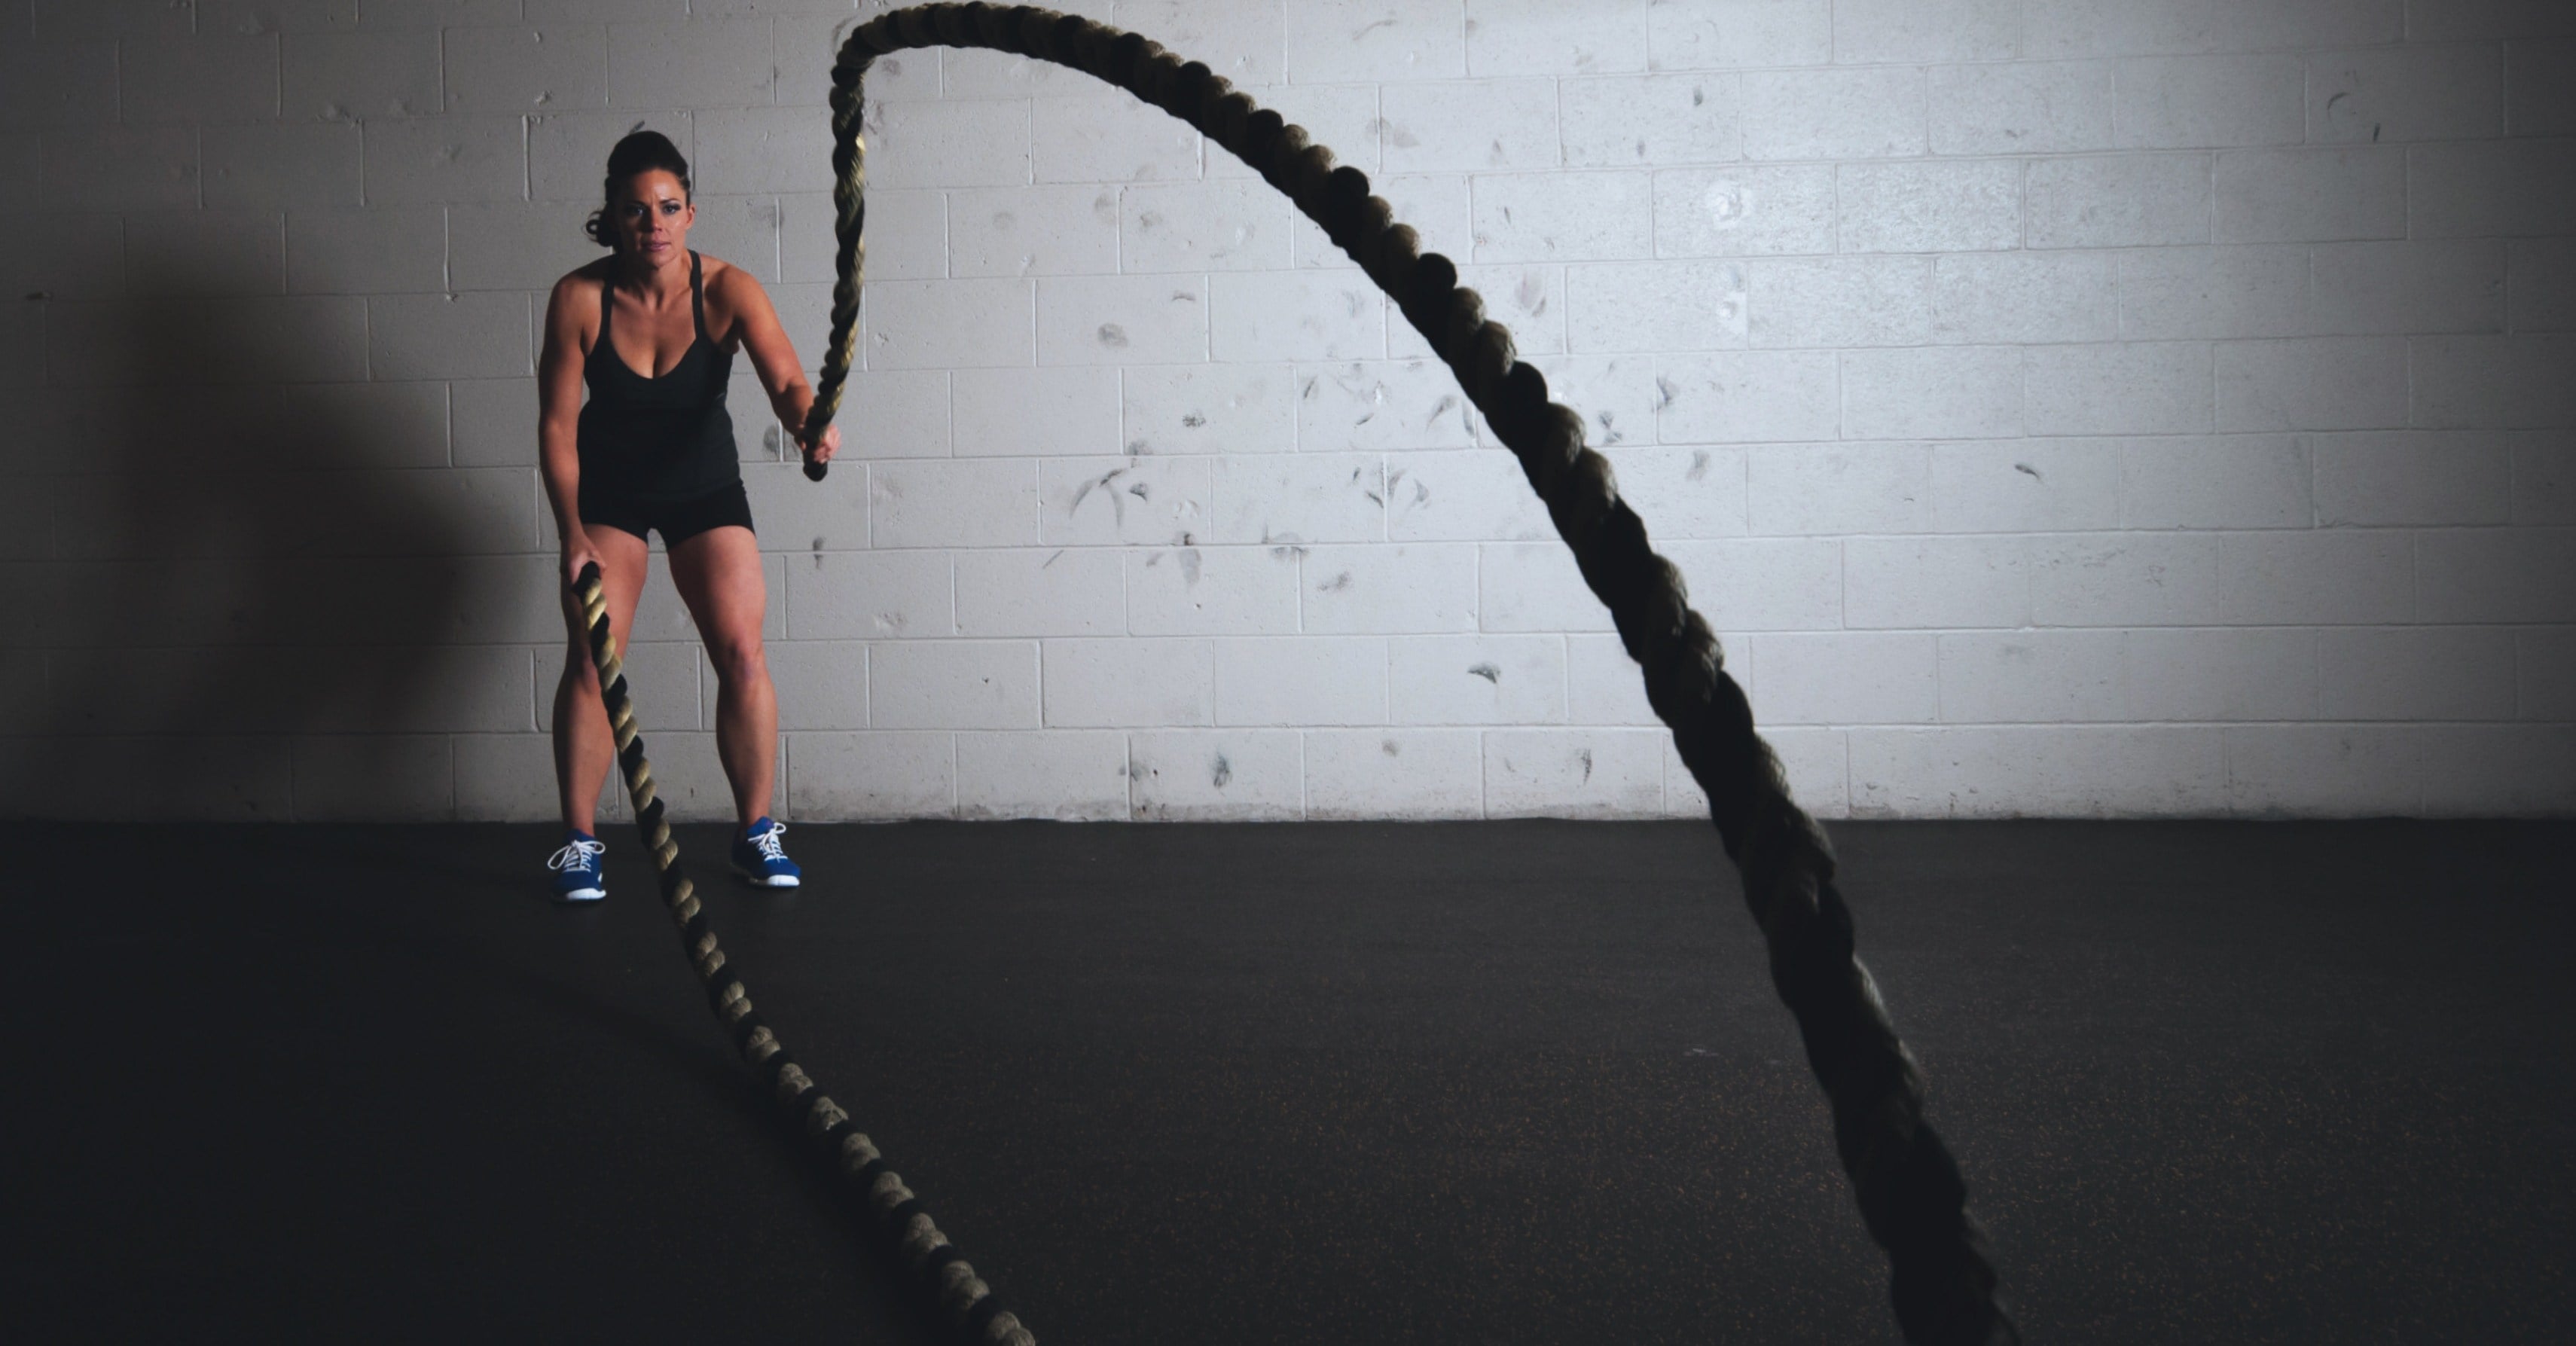 The Best Battle Ropes Workouts to Burn Fat and Build Muscle